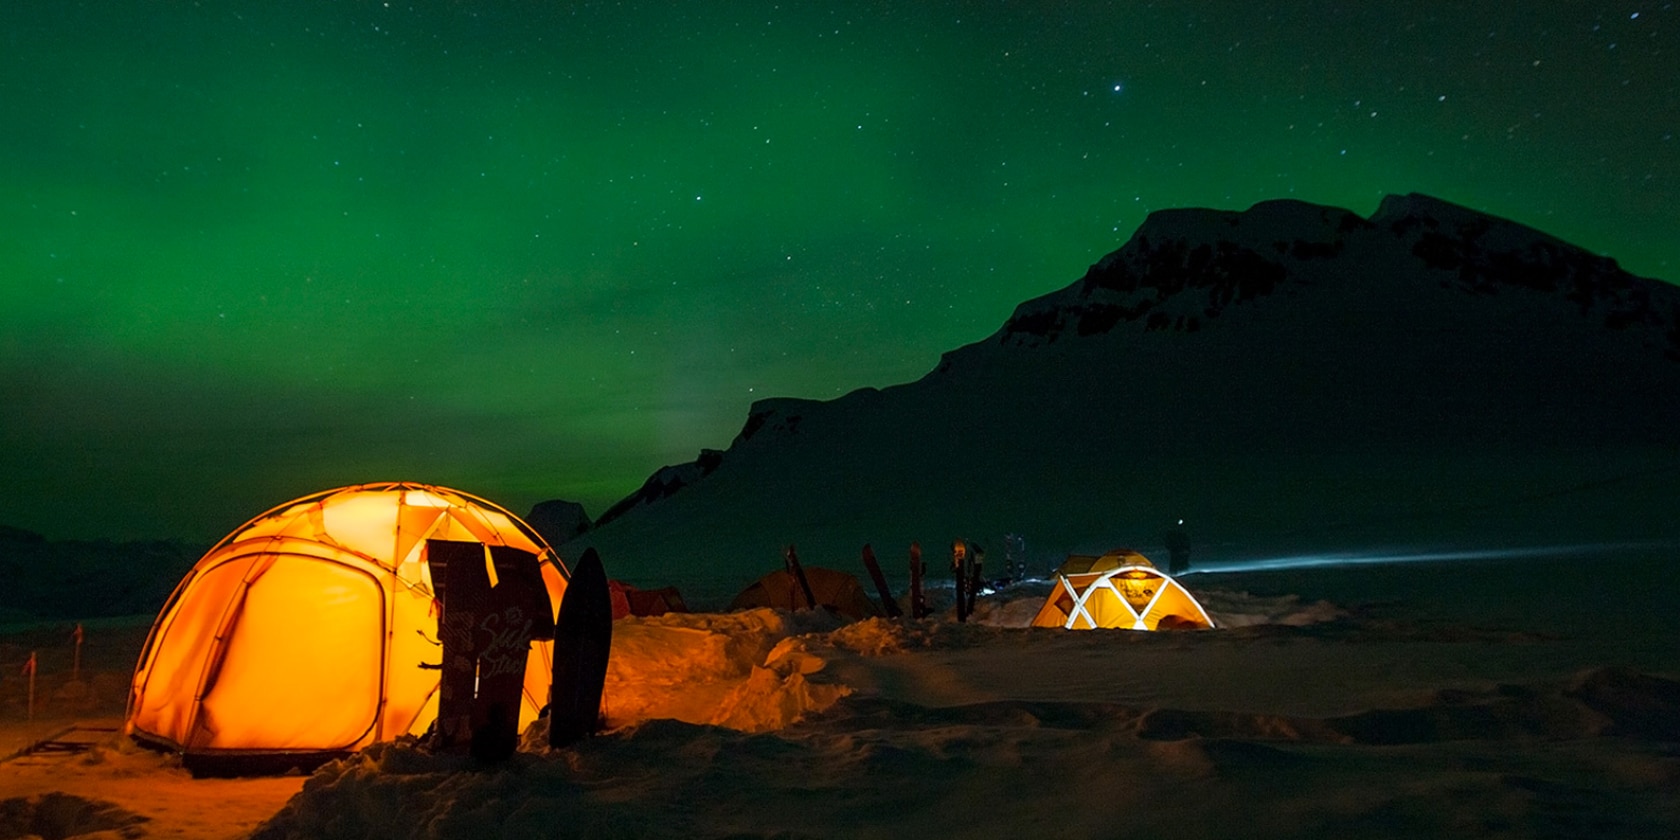 two tents glow from the inside as a green glow illuminates the sky above them